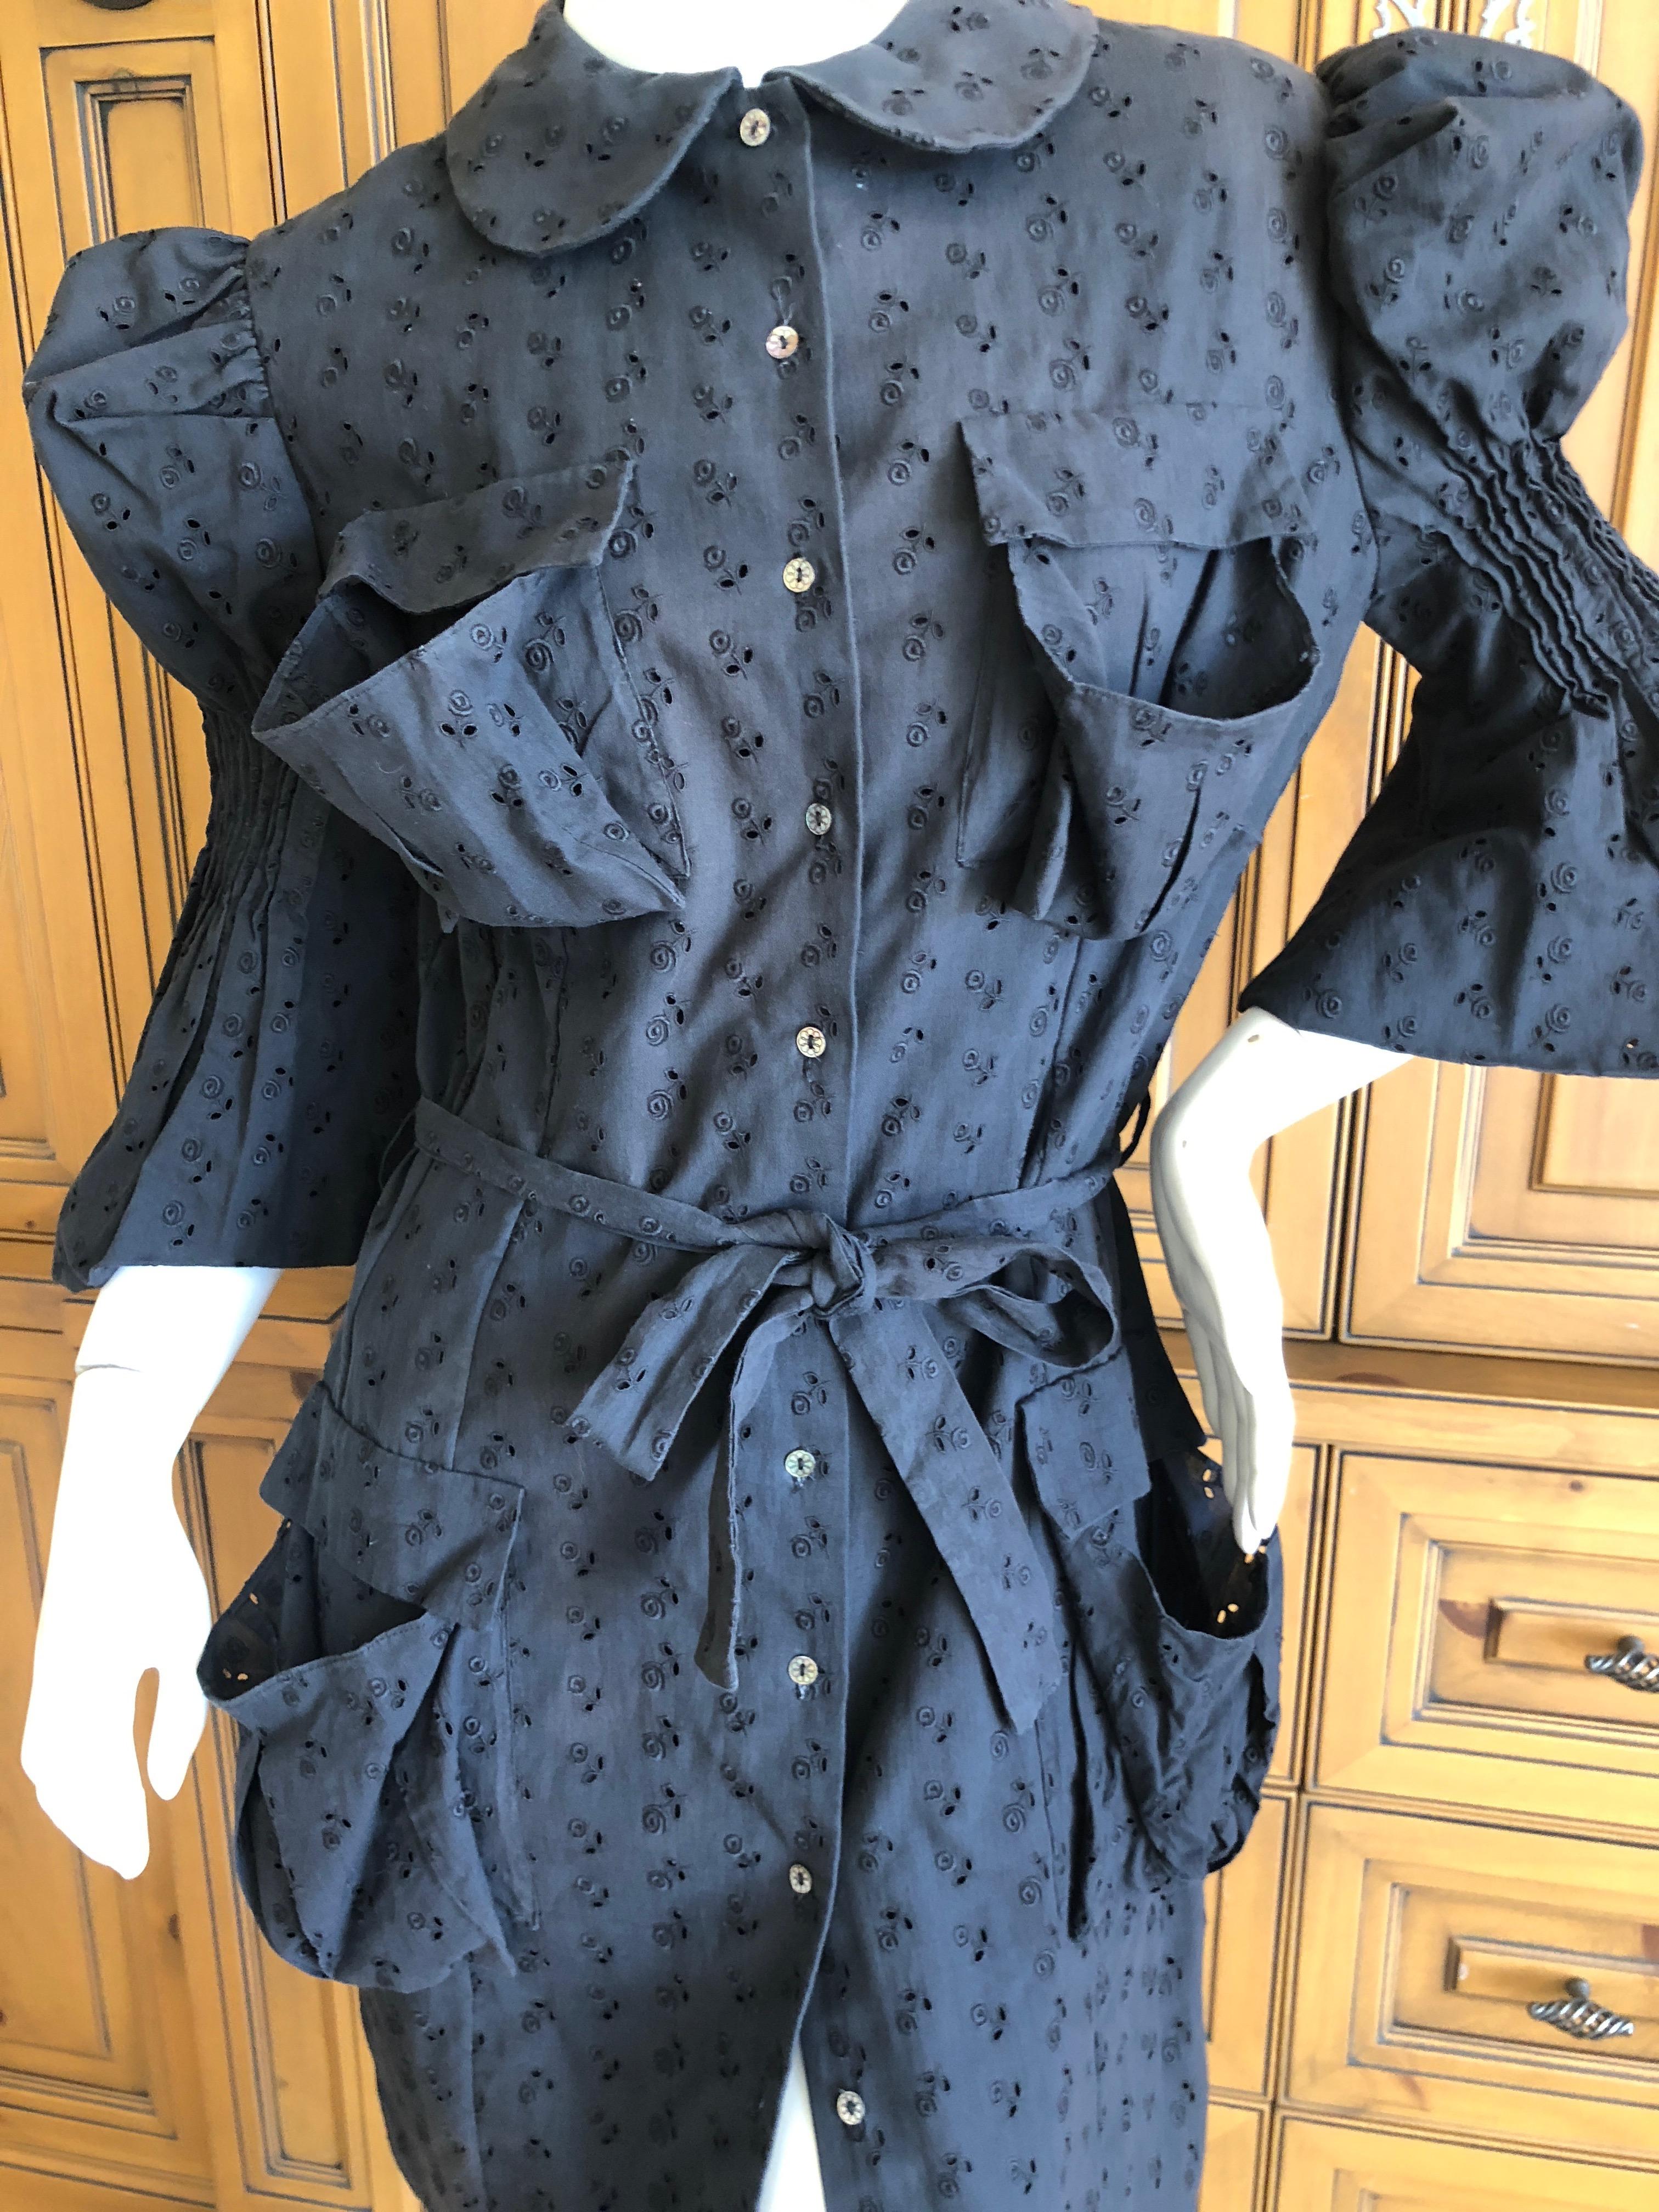 Women's  John Galliano 1998 Black Belted Cotton Eyelet Dress with Leg of Mutton Sleeves